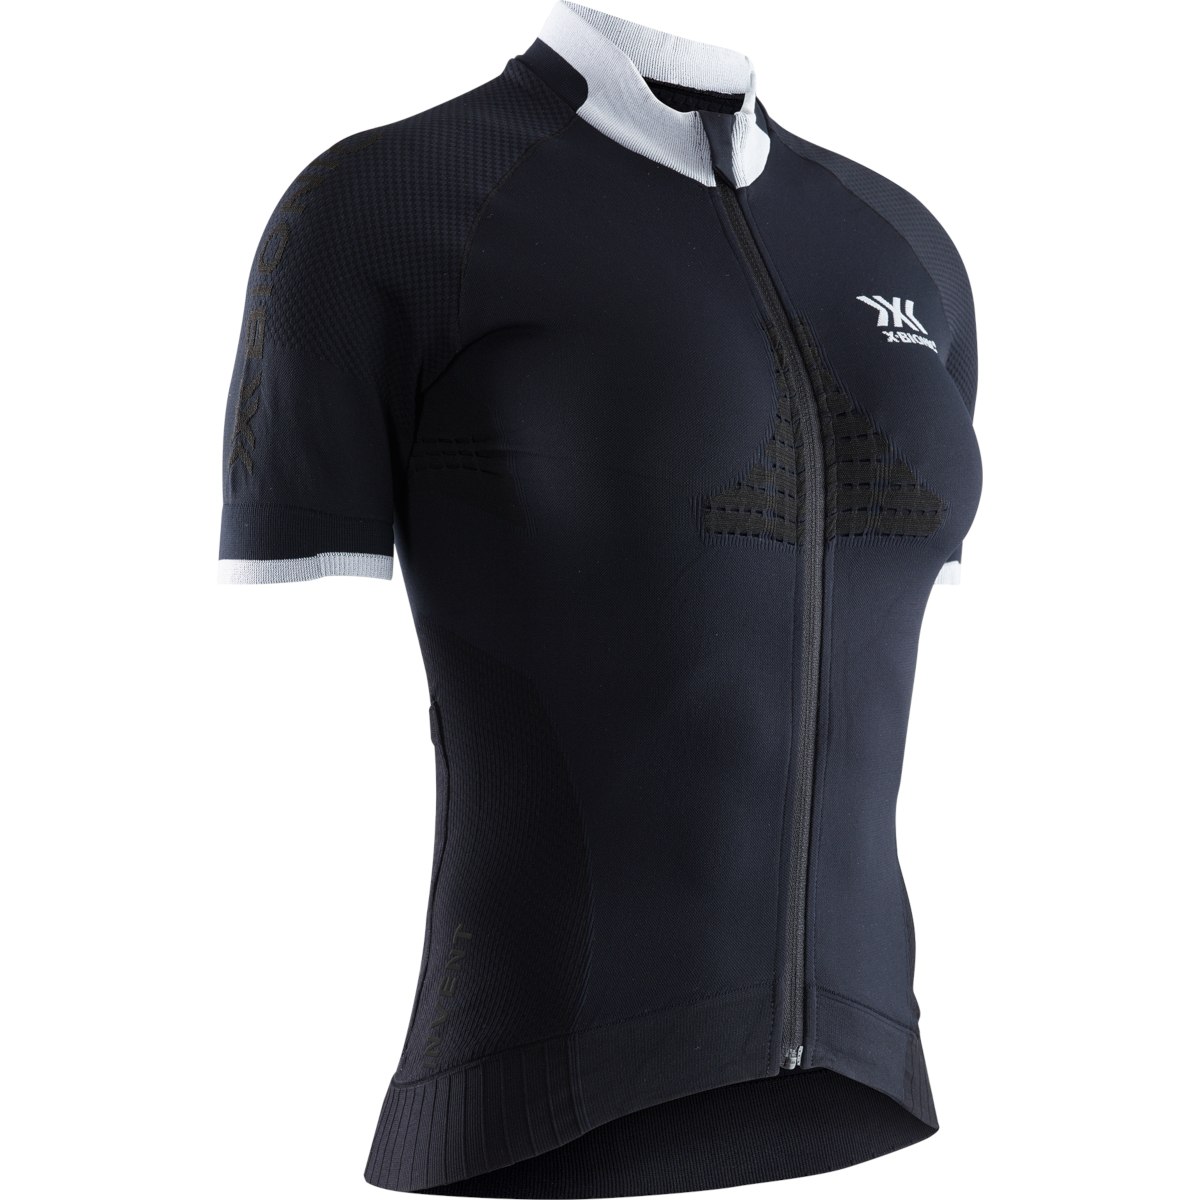 Picture of X-Bionic Invent 4.0 Bike Race Zip Shirt Short Sleeves for Women - opal black/arctic white